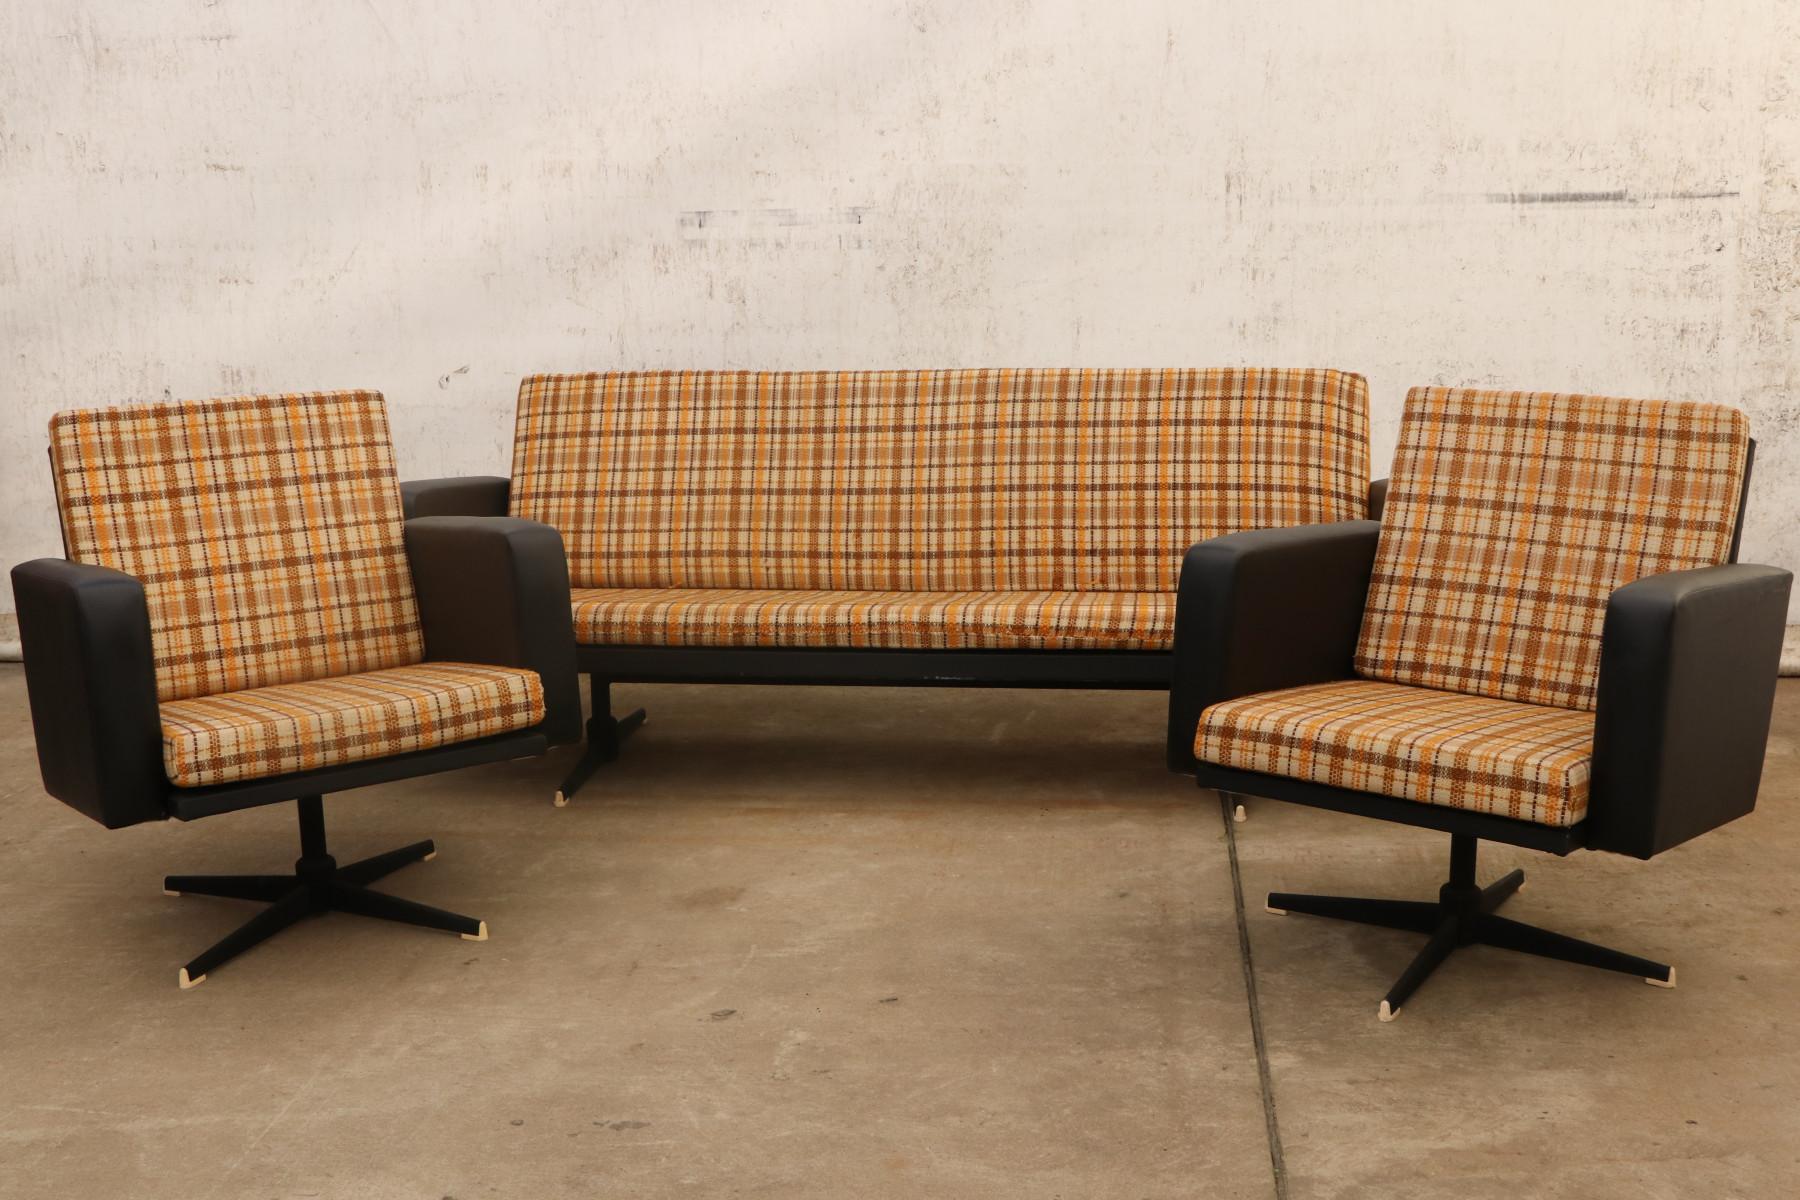 This lounge or office set was made in Czechoslovakia in the 1970s and consists of one sofa and a pair of swivel armchairs. The set is upholstered with brown leatherette and features original checkered fabric. The legs are made of iron. All is in